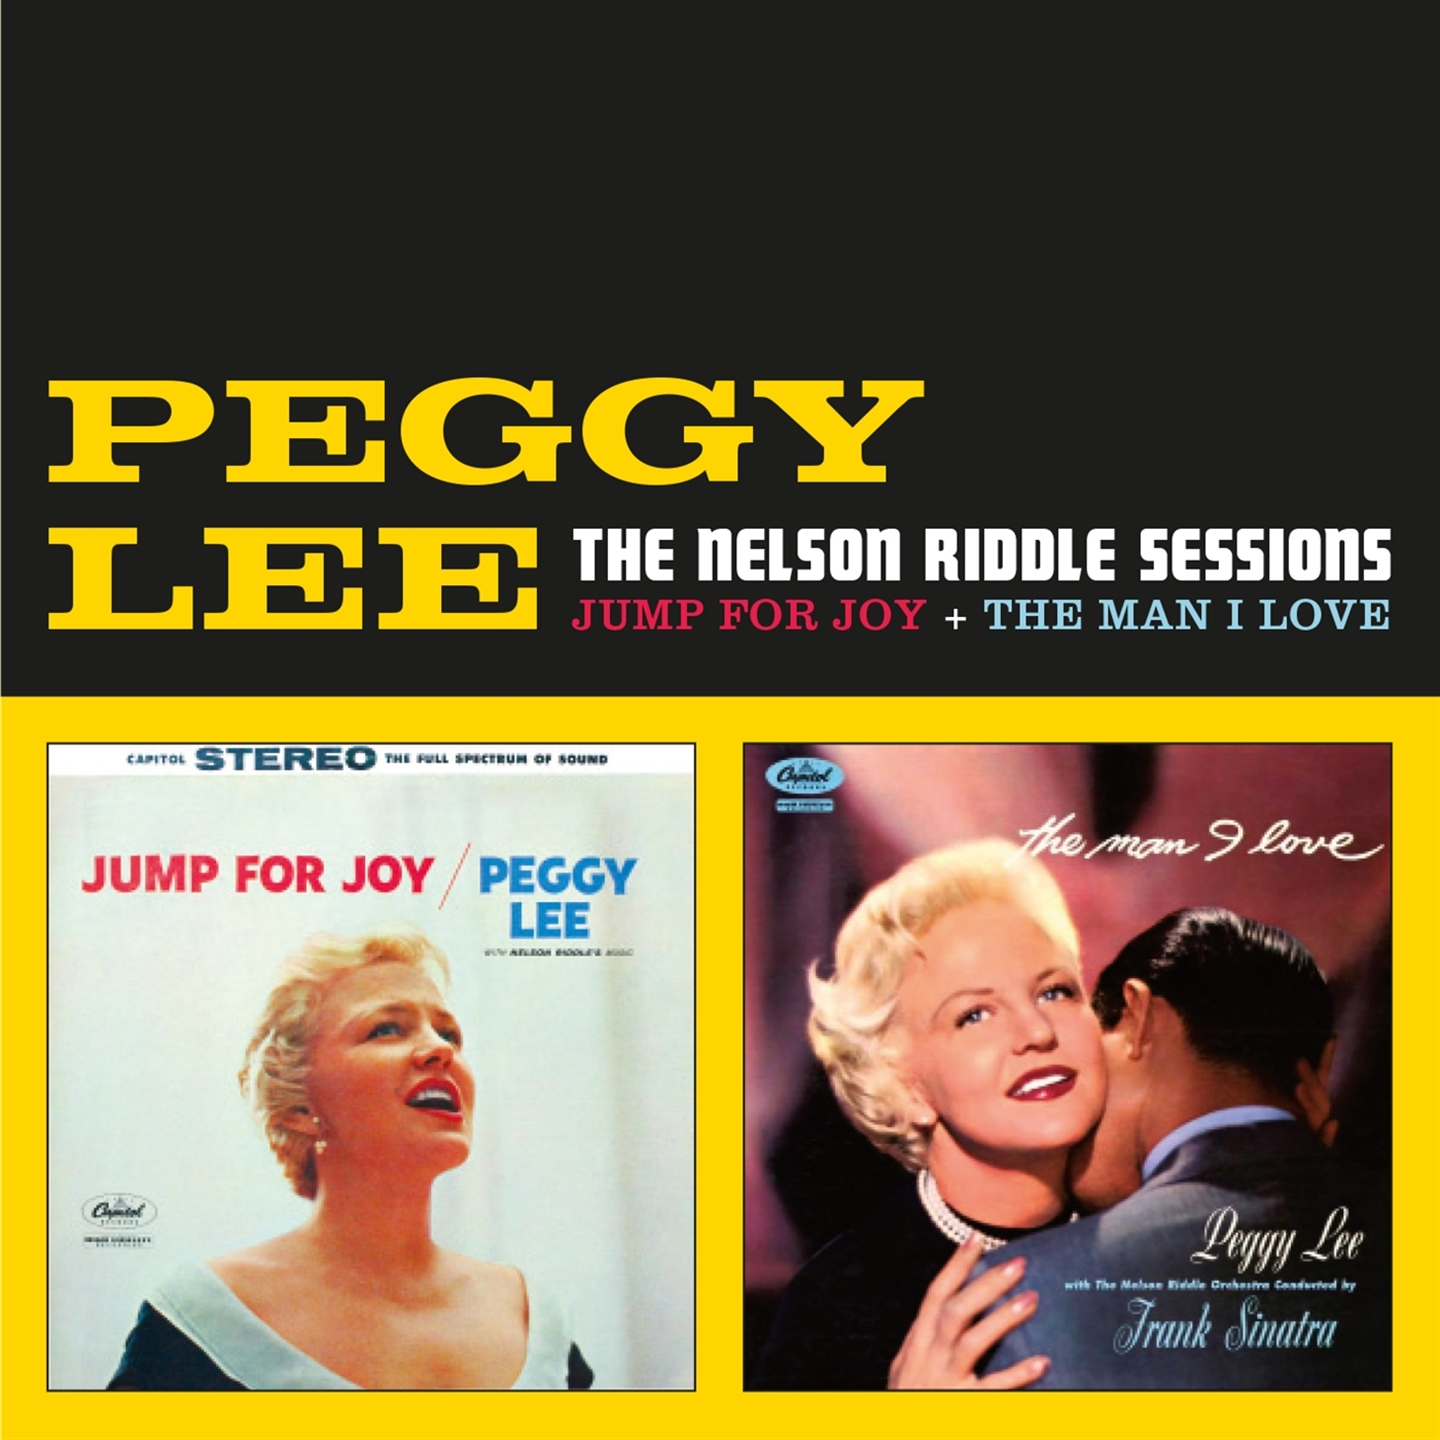 THE NELSON RIDDLE SESSIONS (JUMP FOR JOY + THE MAN I LOVE)